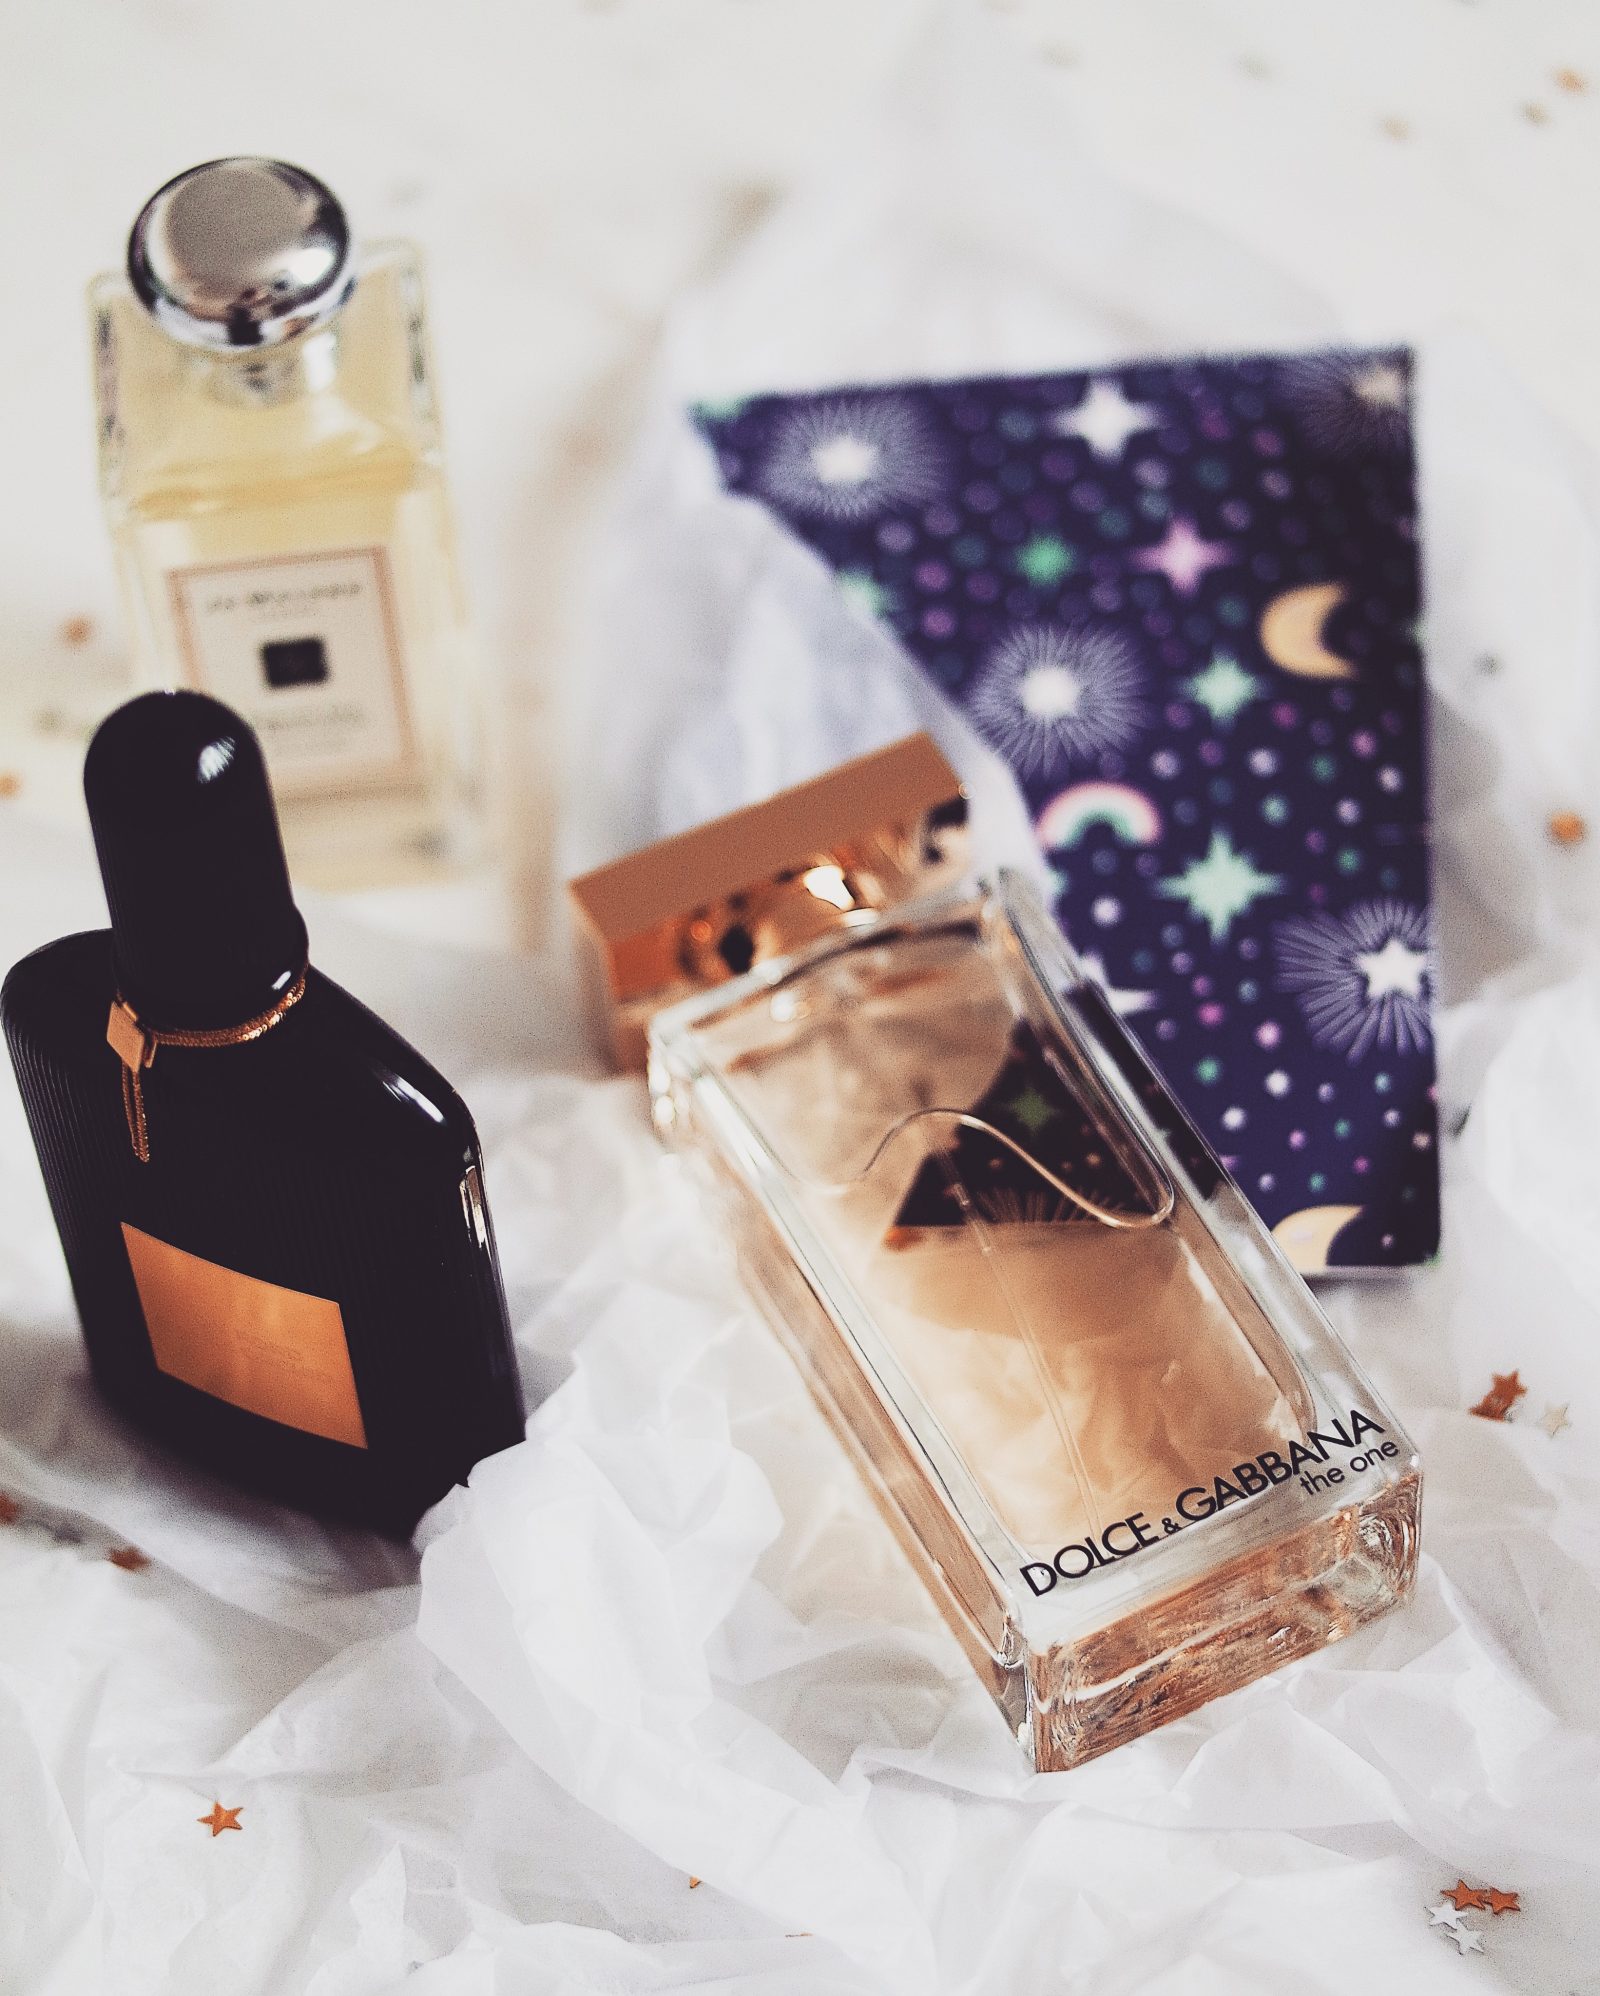 Gift guide for her - Perfume